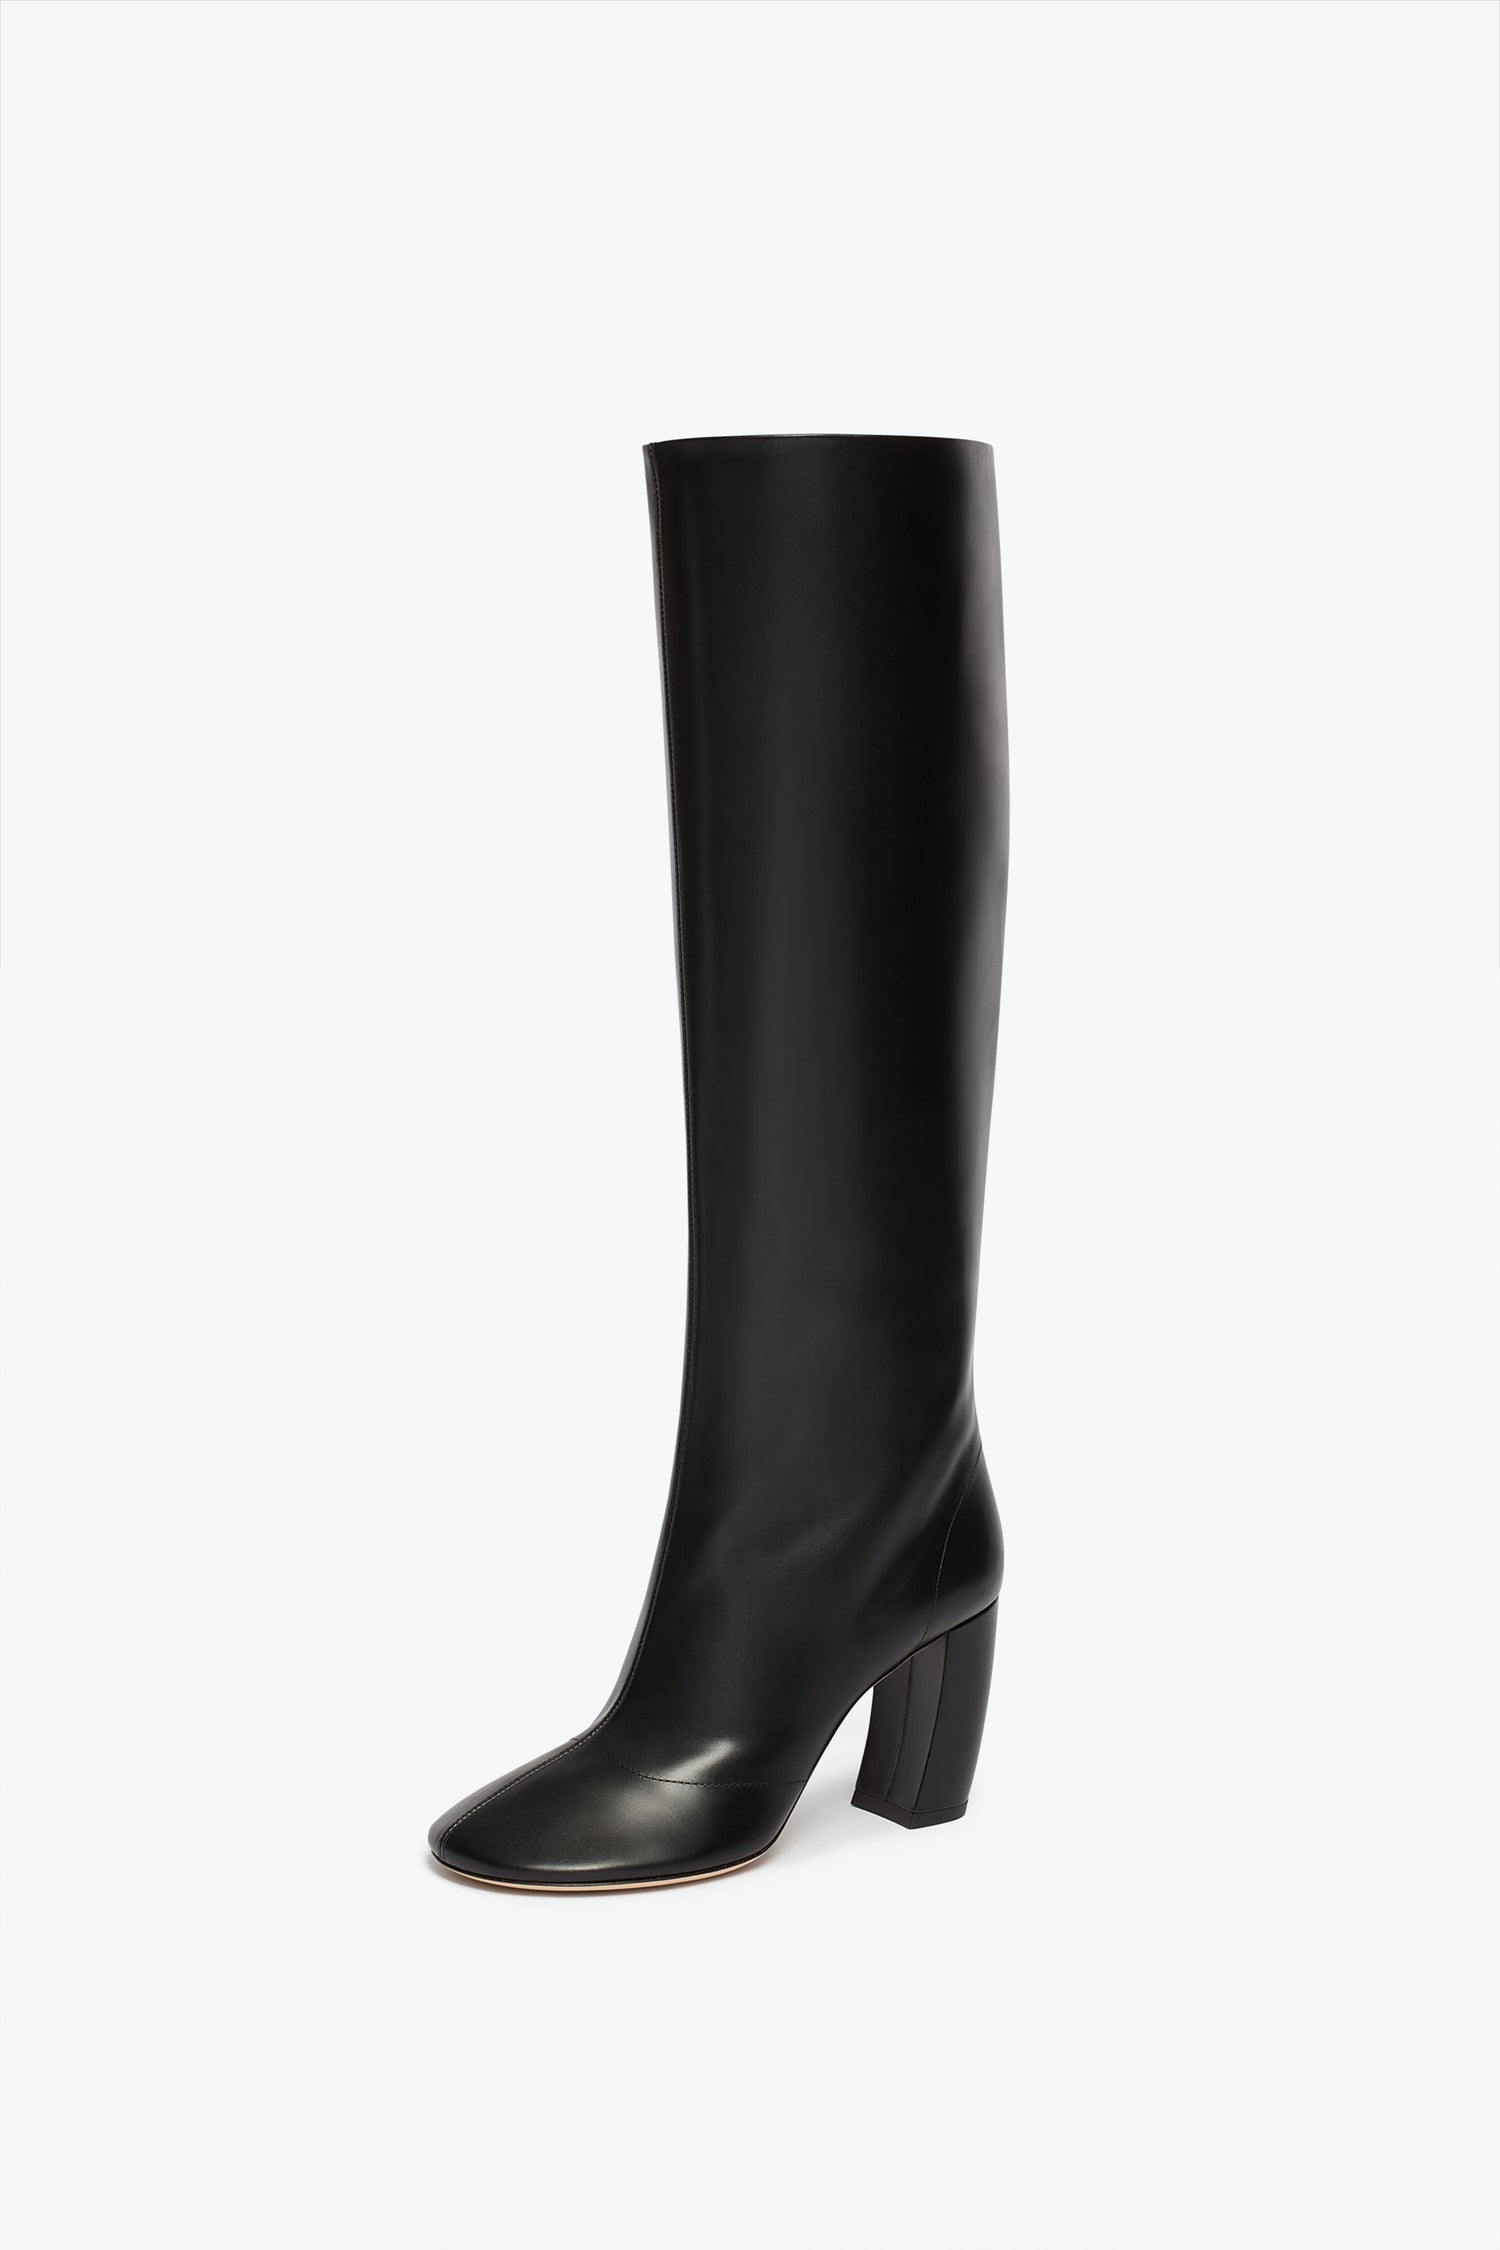 A single Capri Rise Boot 115mm in Black by Victoria Beckham, crafted from luxurious black calf leather, featuring a rounded toe and 115mm block heel, displayed at a slight angle on a white background.